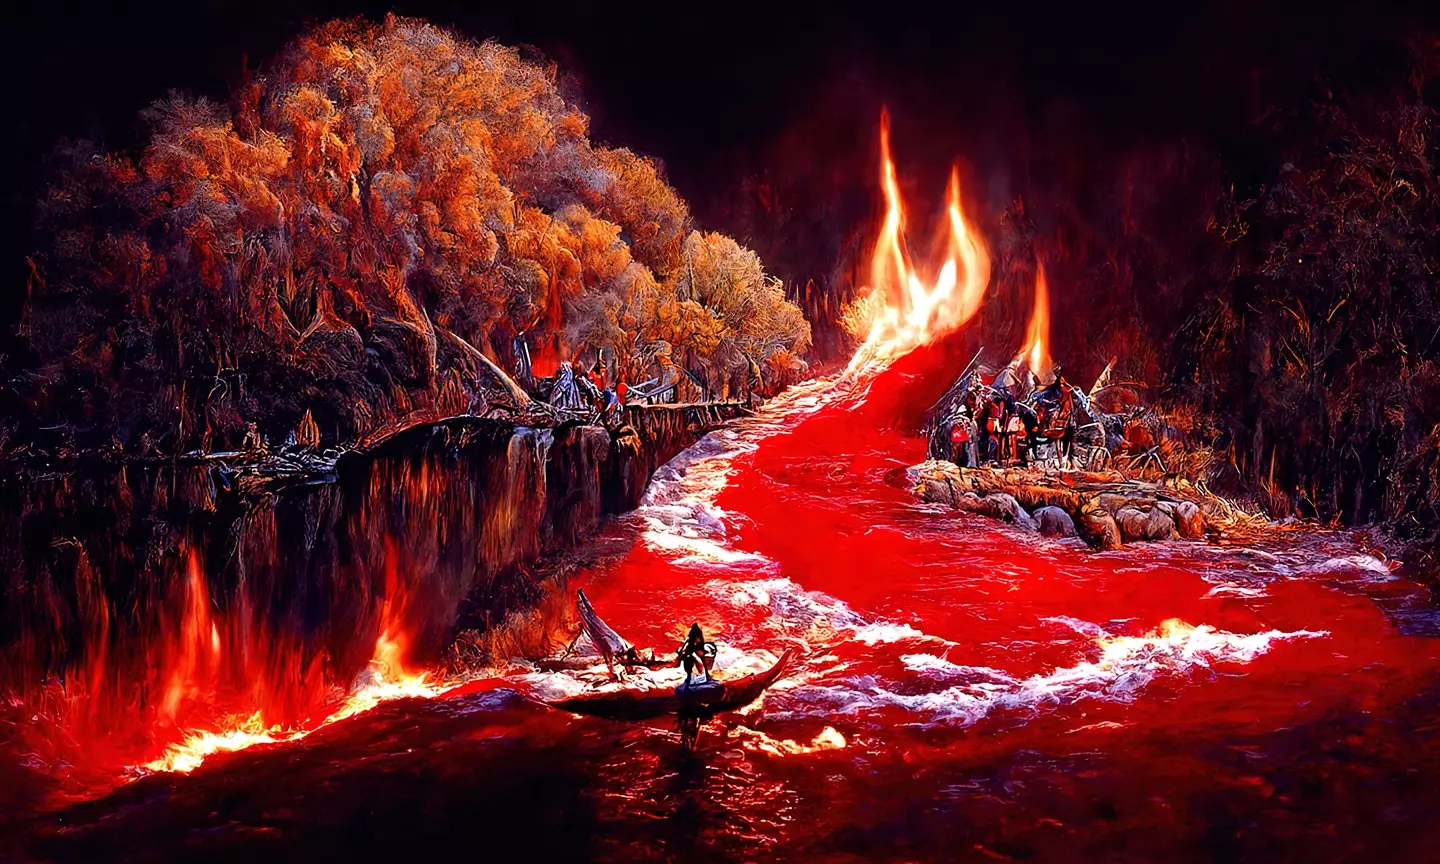 It's a shame that most artistic depictions of hell can't help but make it look really awesome.